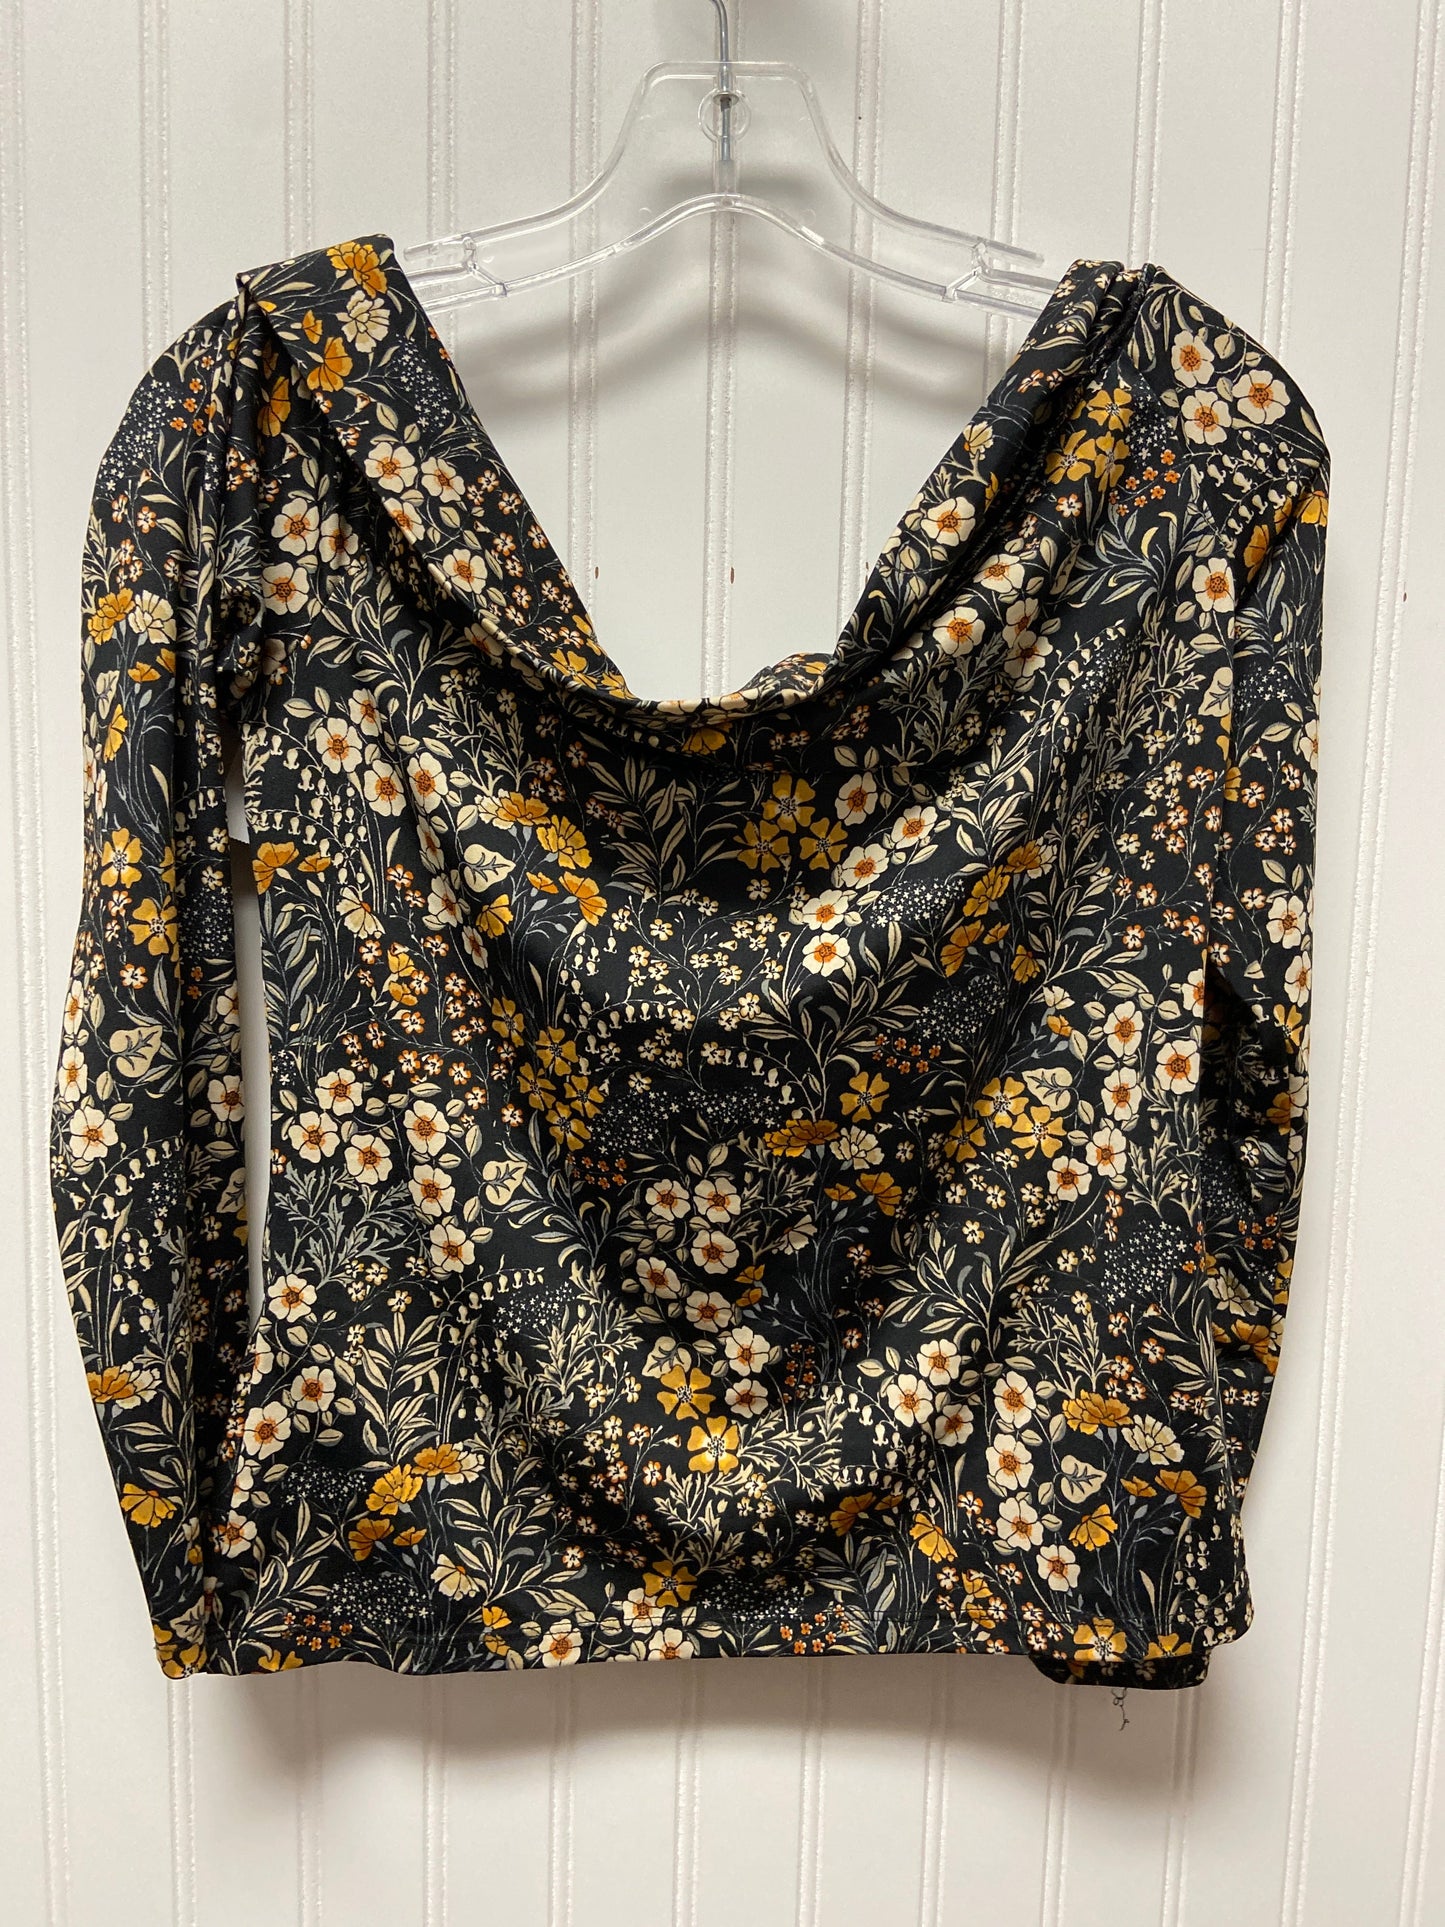 Floral Print Top Long Sleeve H&m, Size M